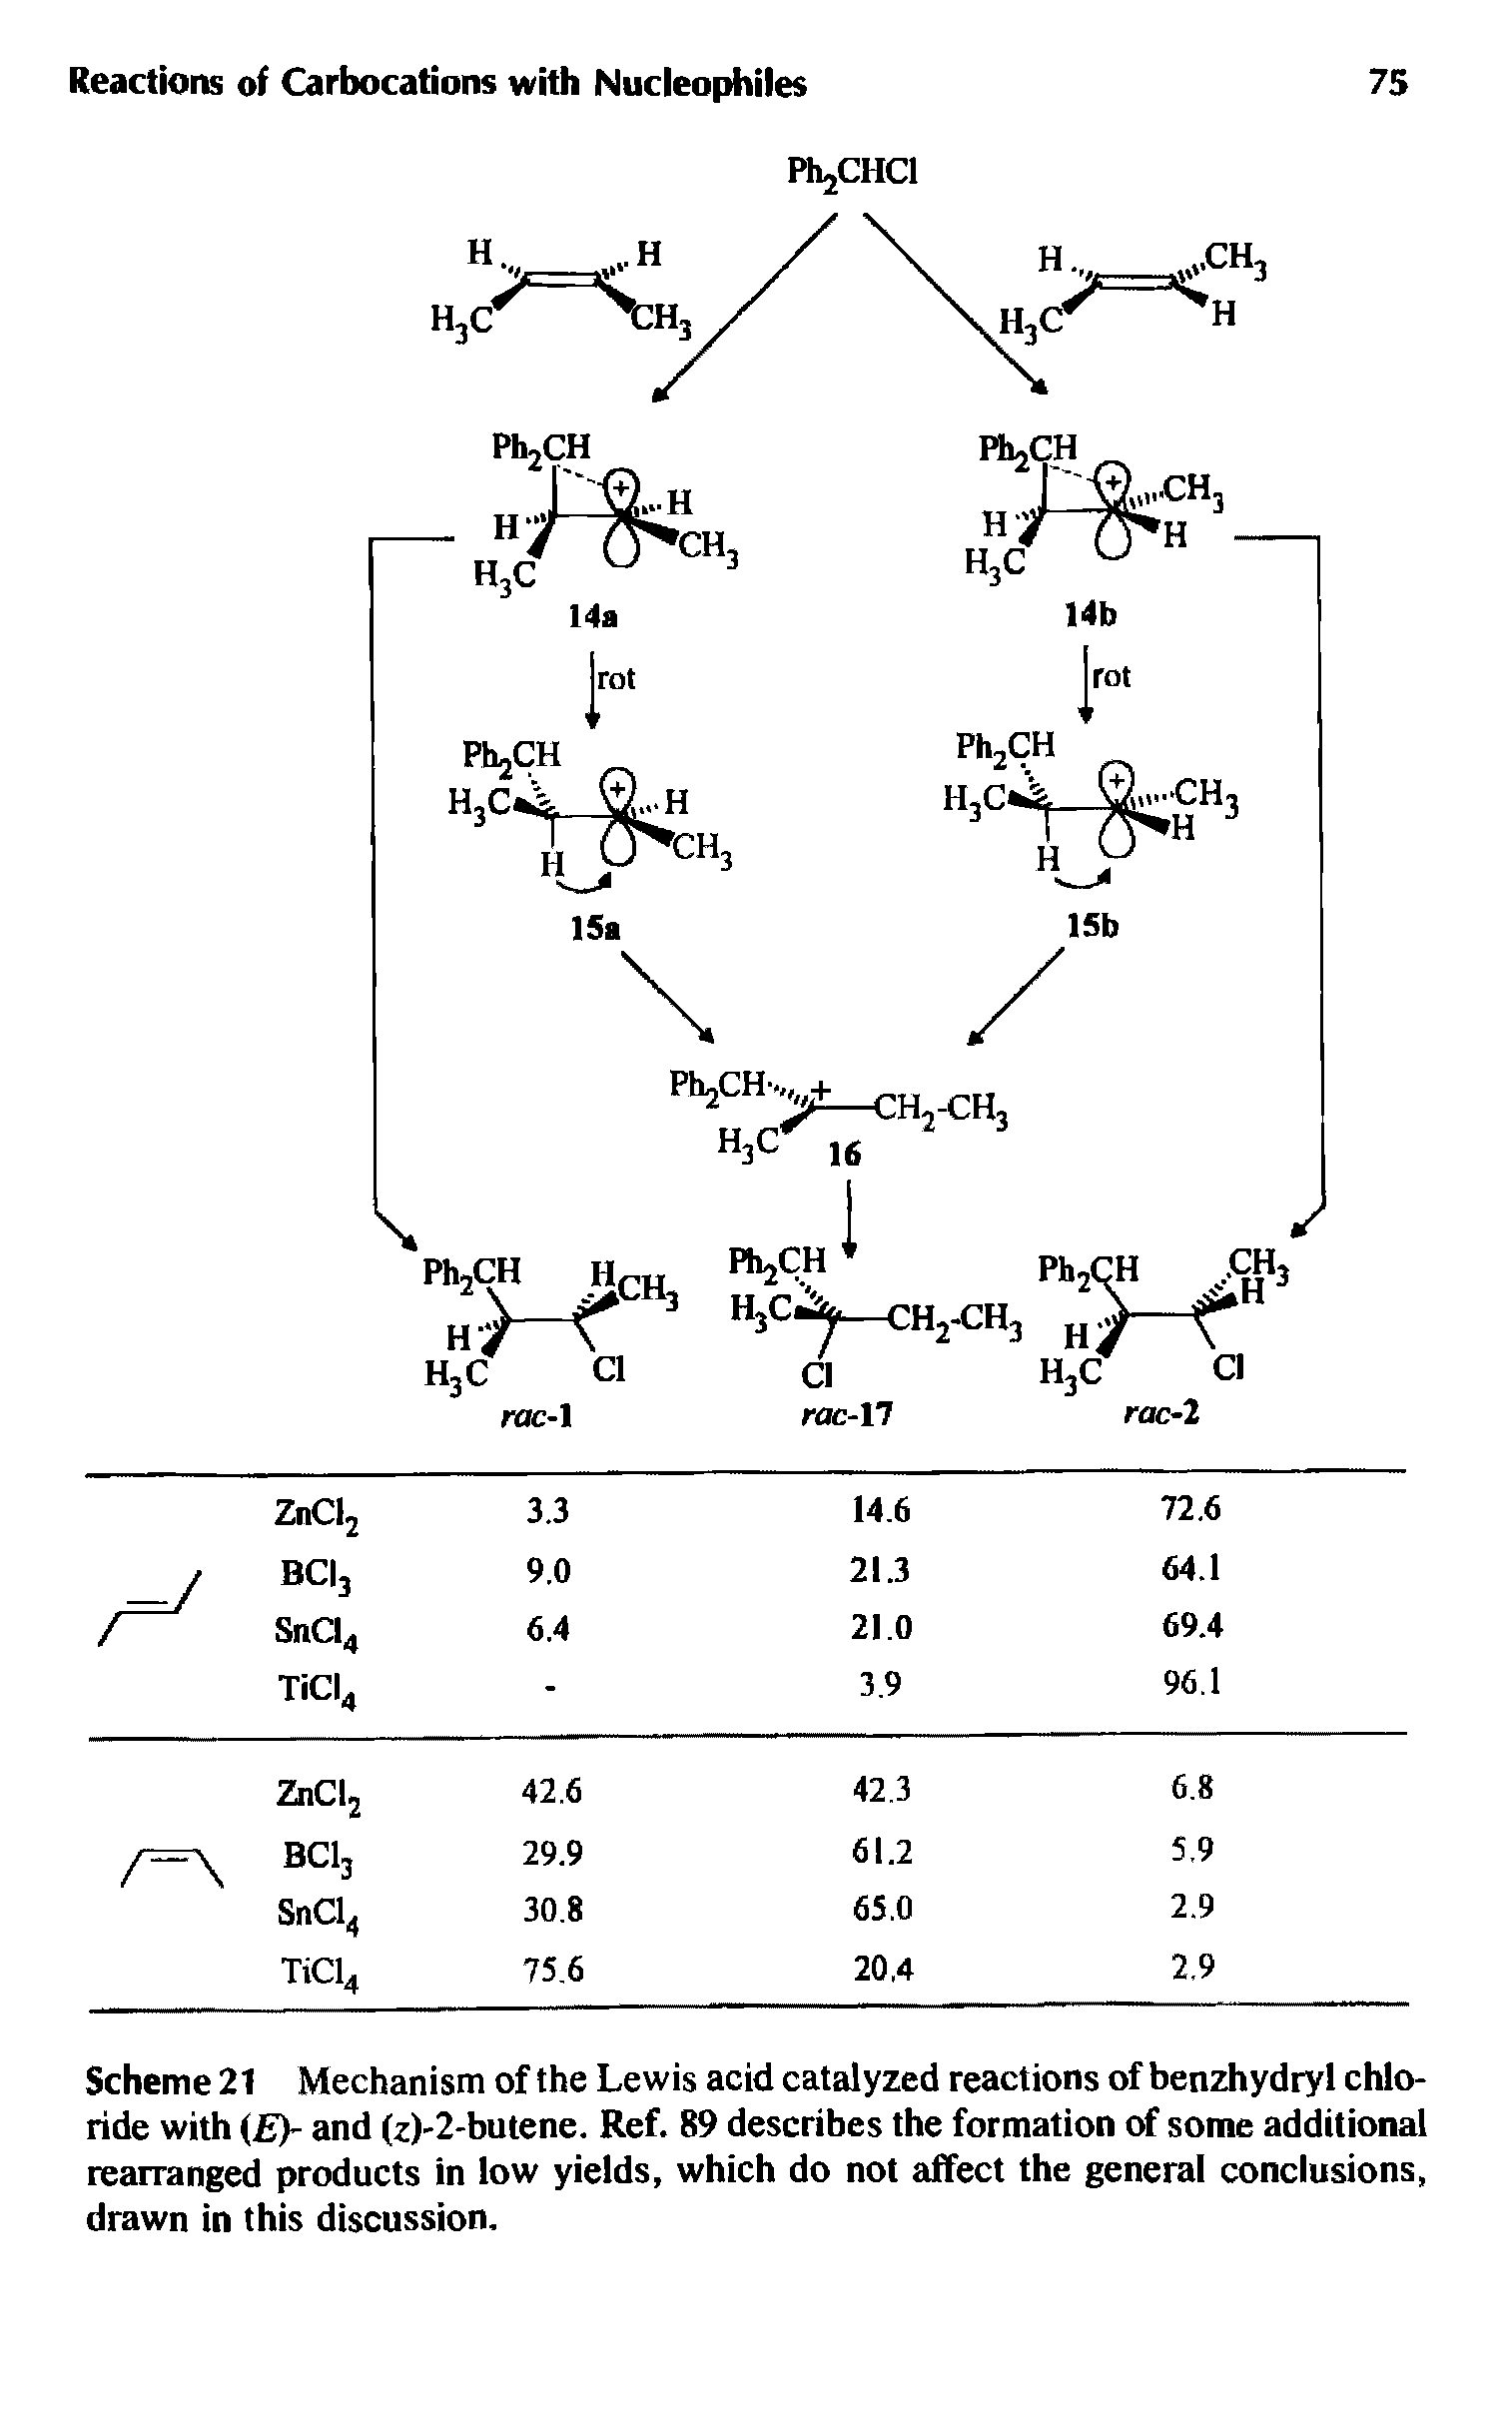 Scheme 21 Mechanism of the Lewis acid catalyzed reactions of benzhydryl chloride with (Ey and (z)-2-butene. Ref. 89 describes the formation of some additional rearranged products in low yields, which do not affect the general conclusions, drawn in this discussion.